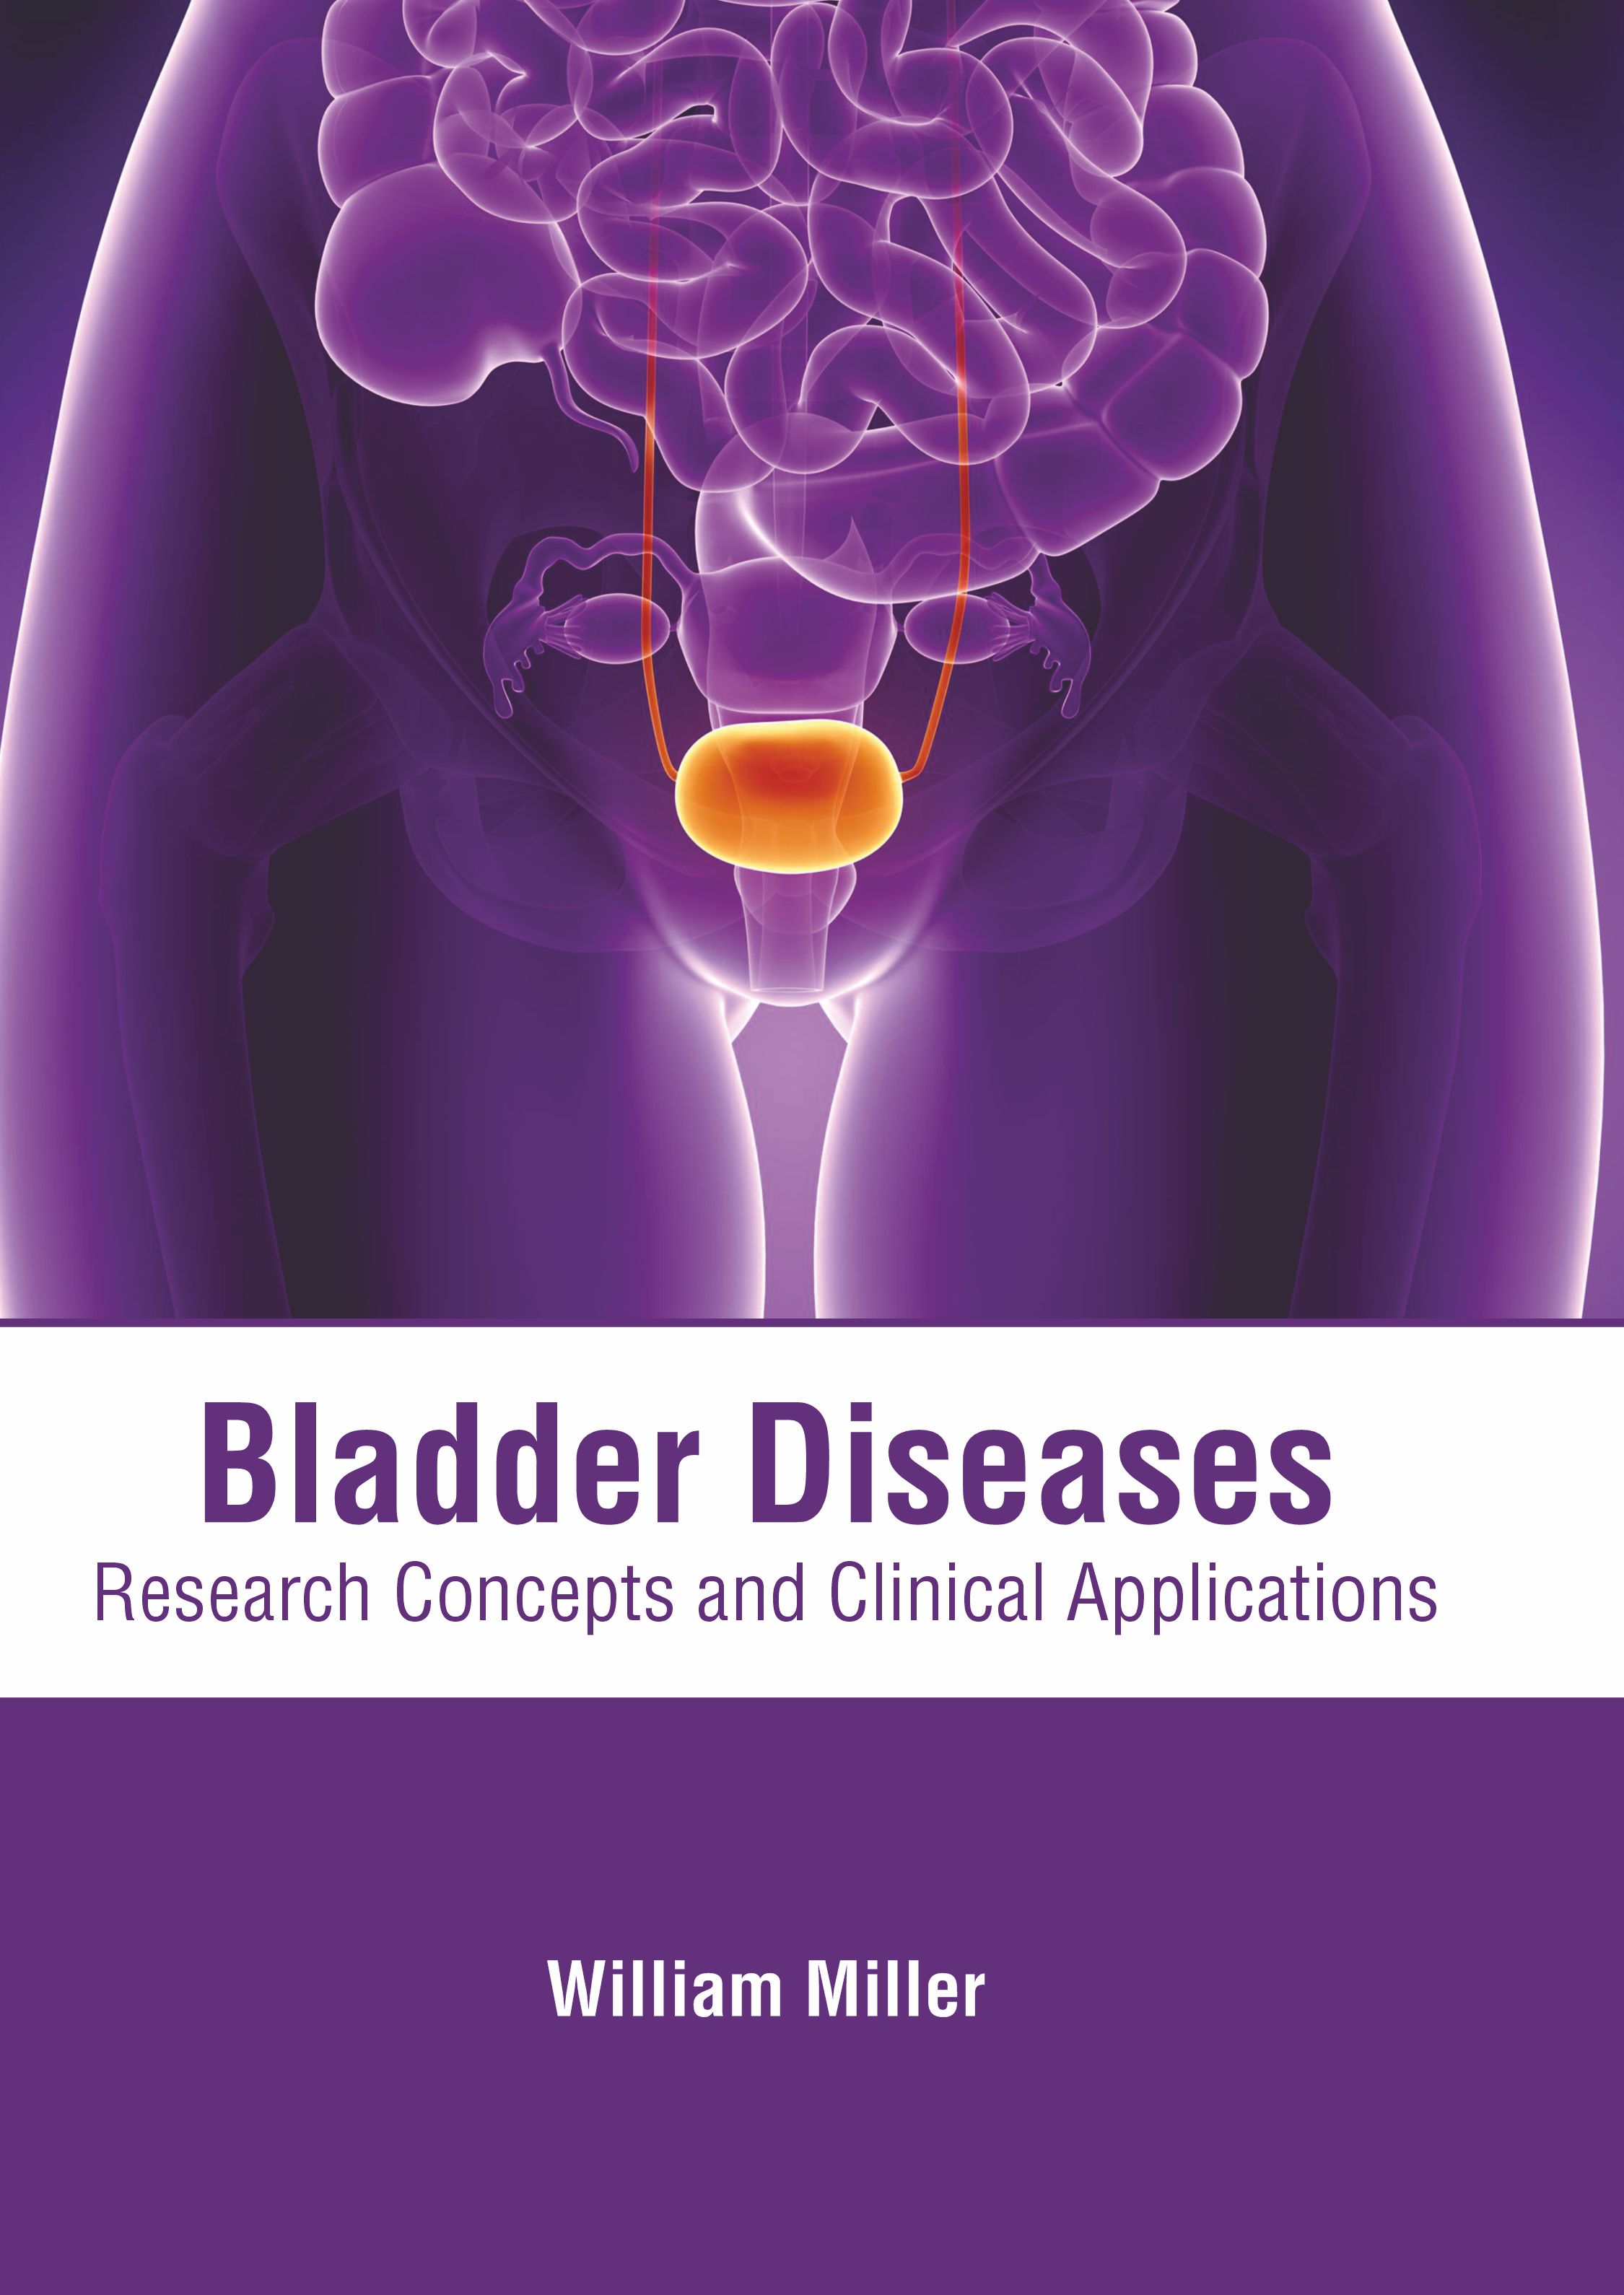 
exclusive-publishers/american-medical-publishers/bladder-diseases-research-concepts-and-clinical-applications-9781639275106